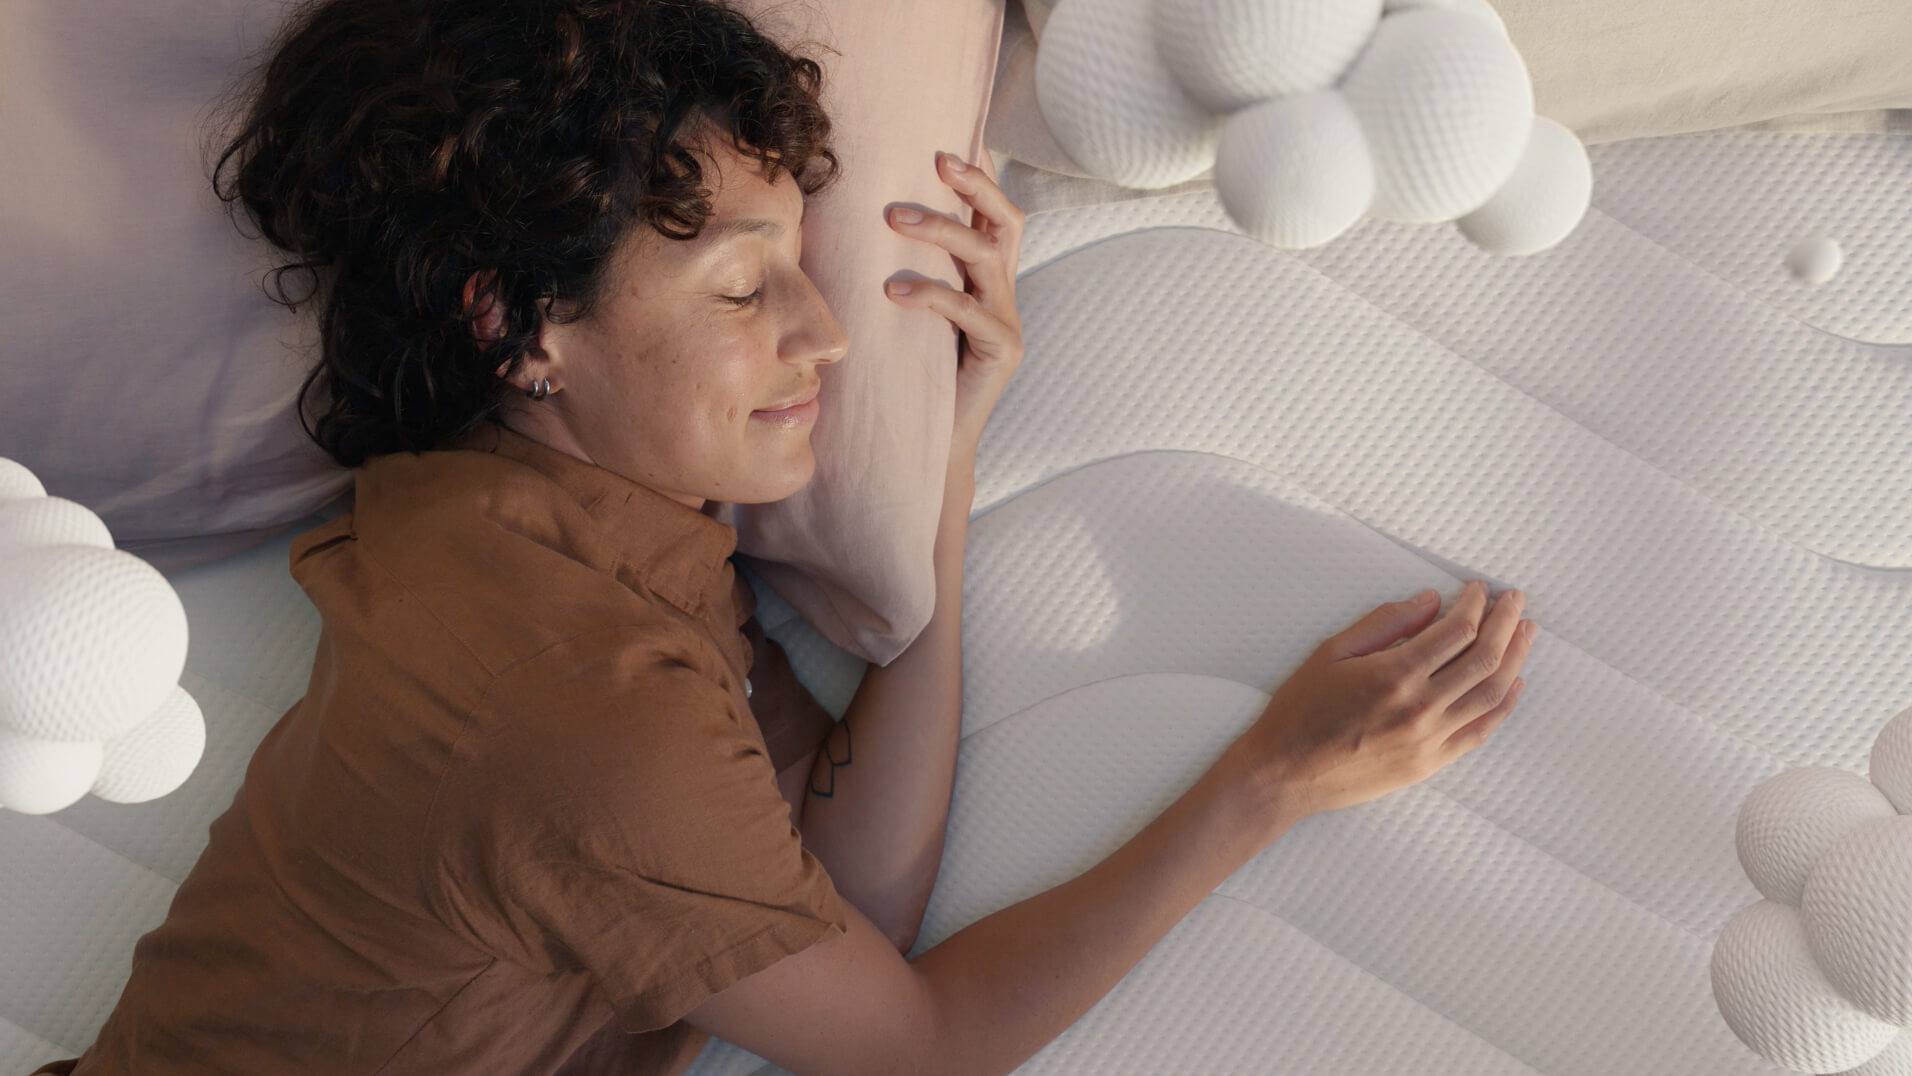 Koala Kloudcel television campaign commercial showing woman laying on bed sleeping peacefully as VFX foam clouds surround her